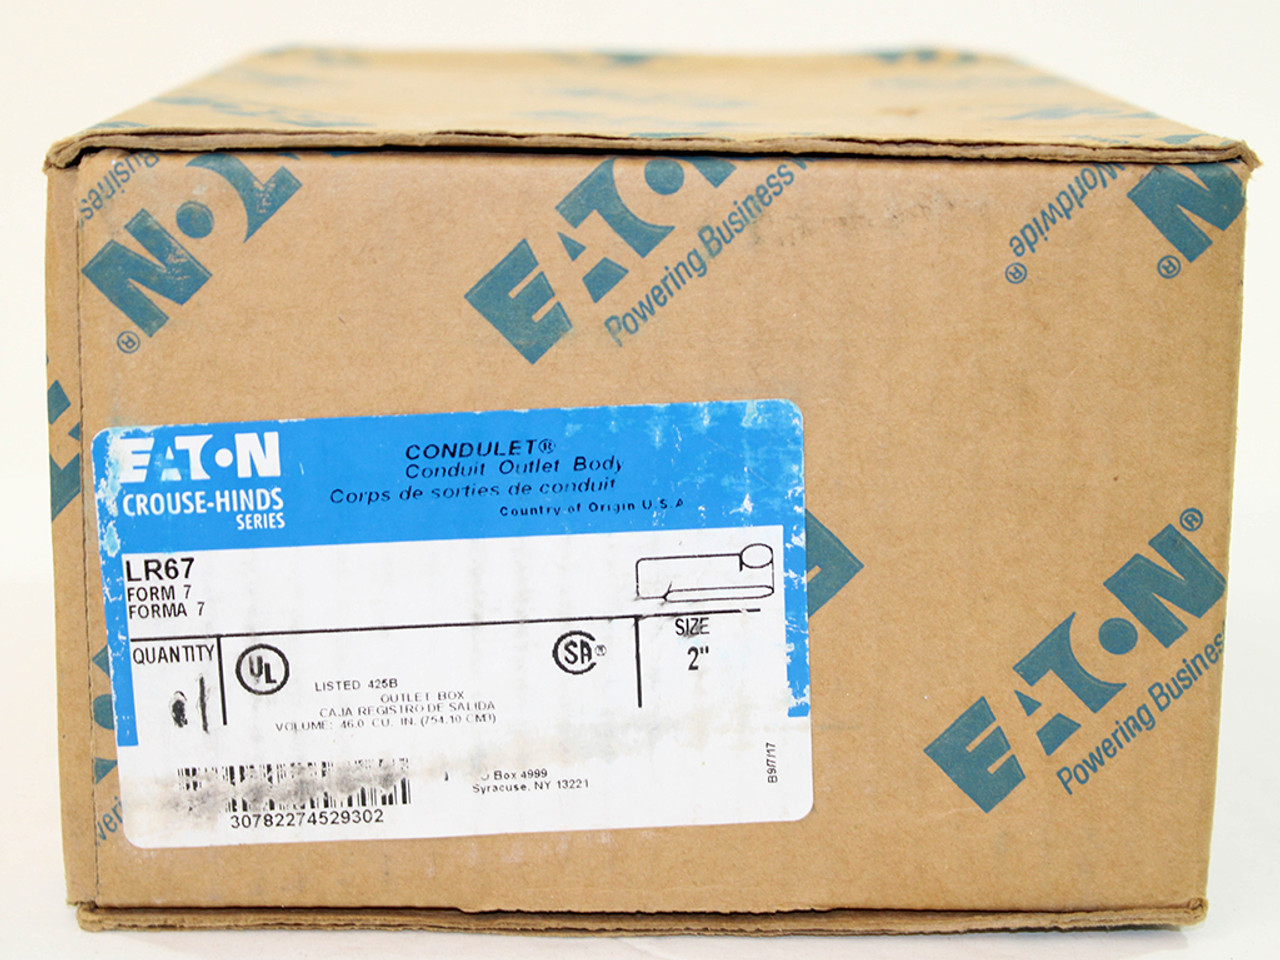 Eaton LR67 Conduit Body 2 Inch Crouse-Hinds Series Form 7 Feraloy Iron Alloy